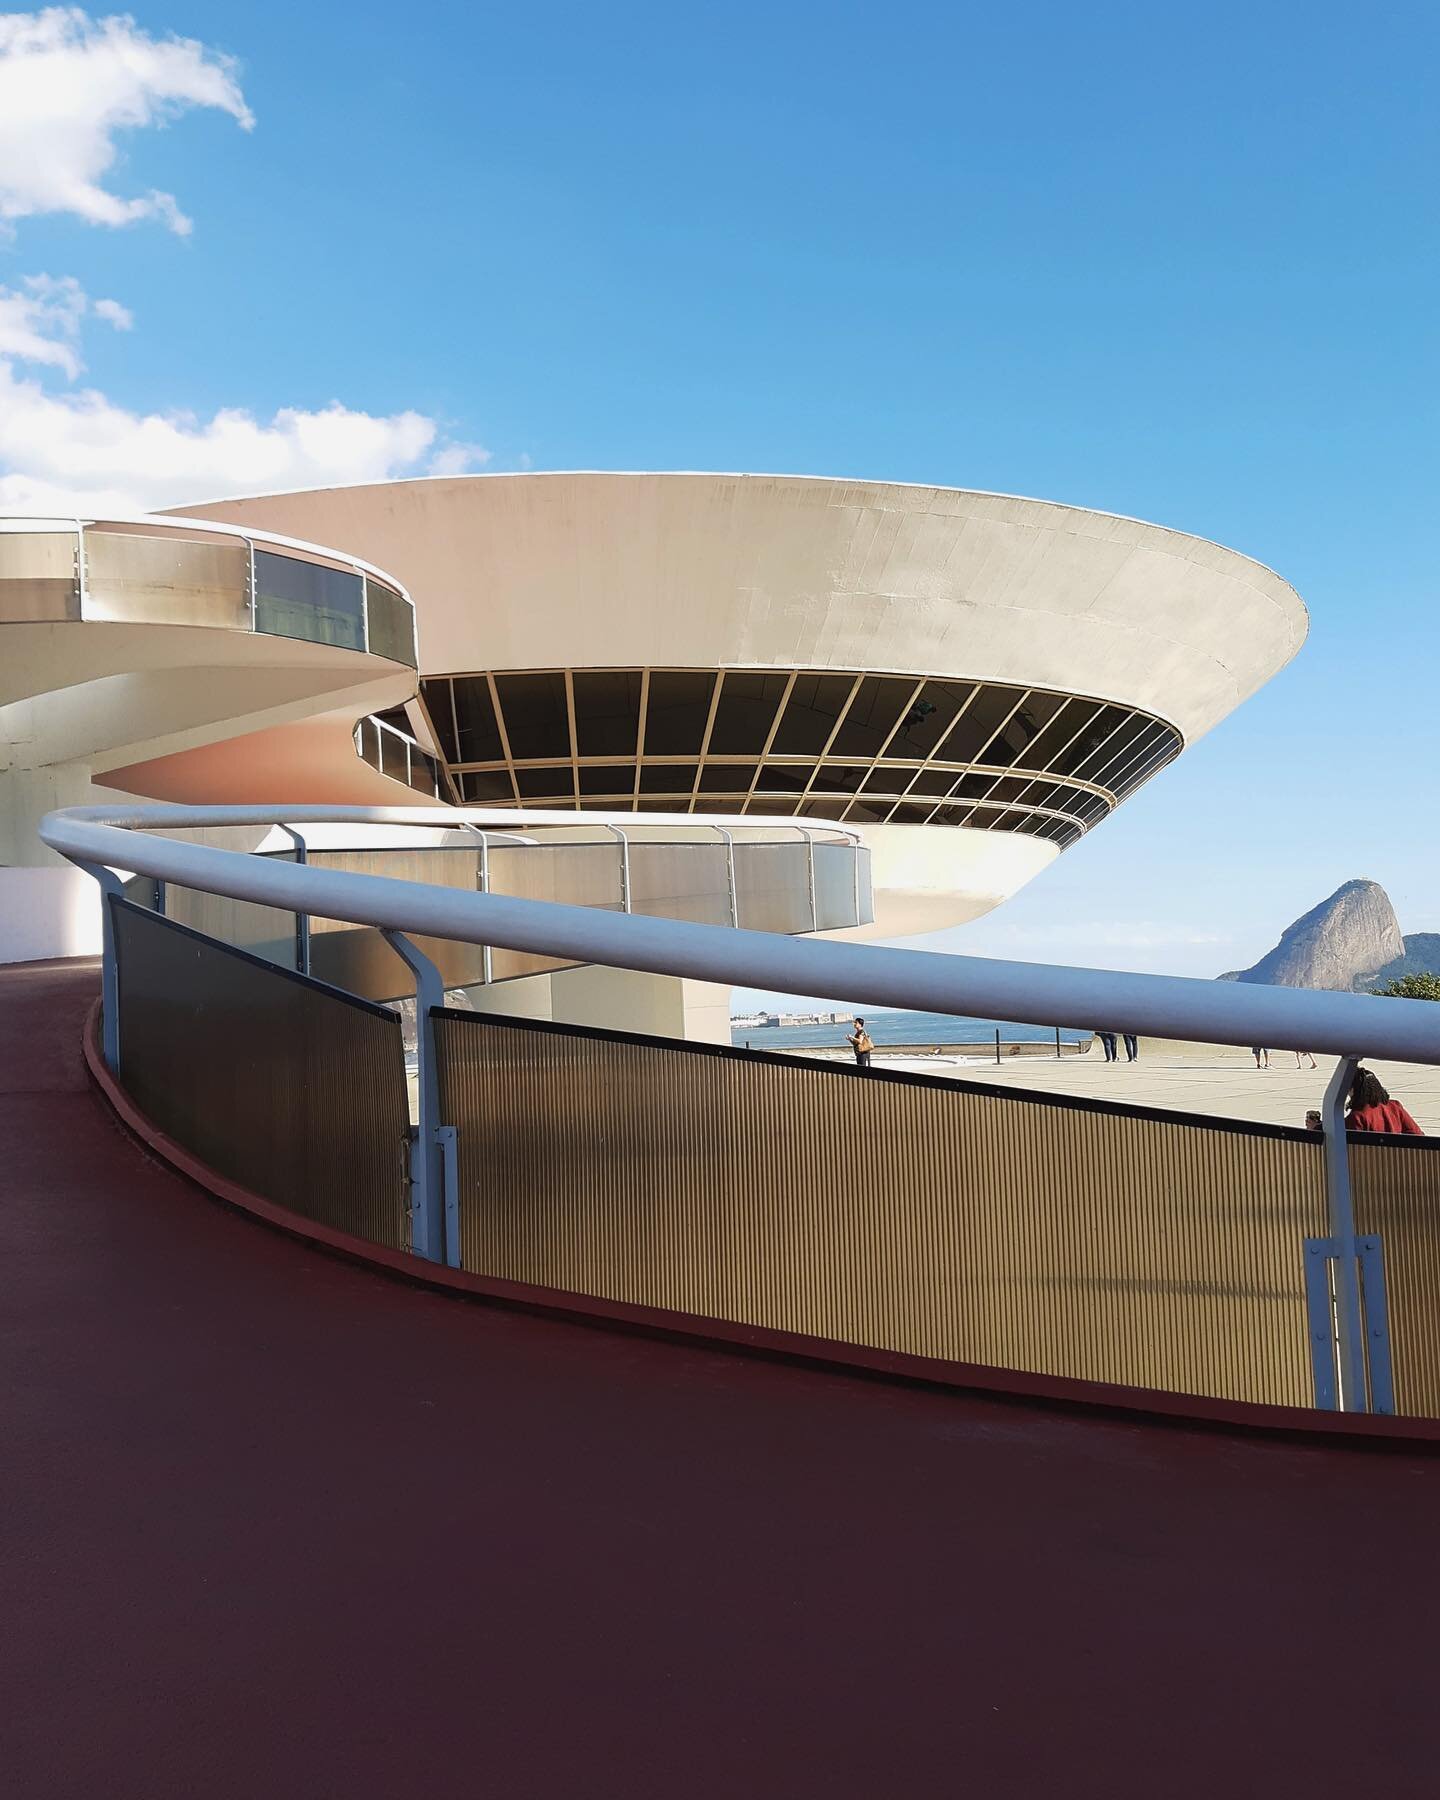 #INSPIRATION: The Niter&oacute;i Contemporary Art Museum, also know as the MAC, was designed by the famed Brazilian architect Oscar Niemeyer and completed in 1996. This iconic saucer-shaped structure, situated on a cliffside above Guanabara bay in th